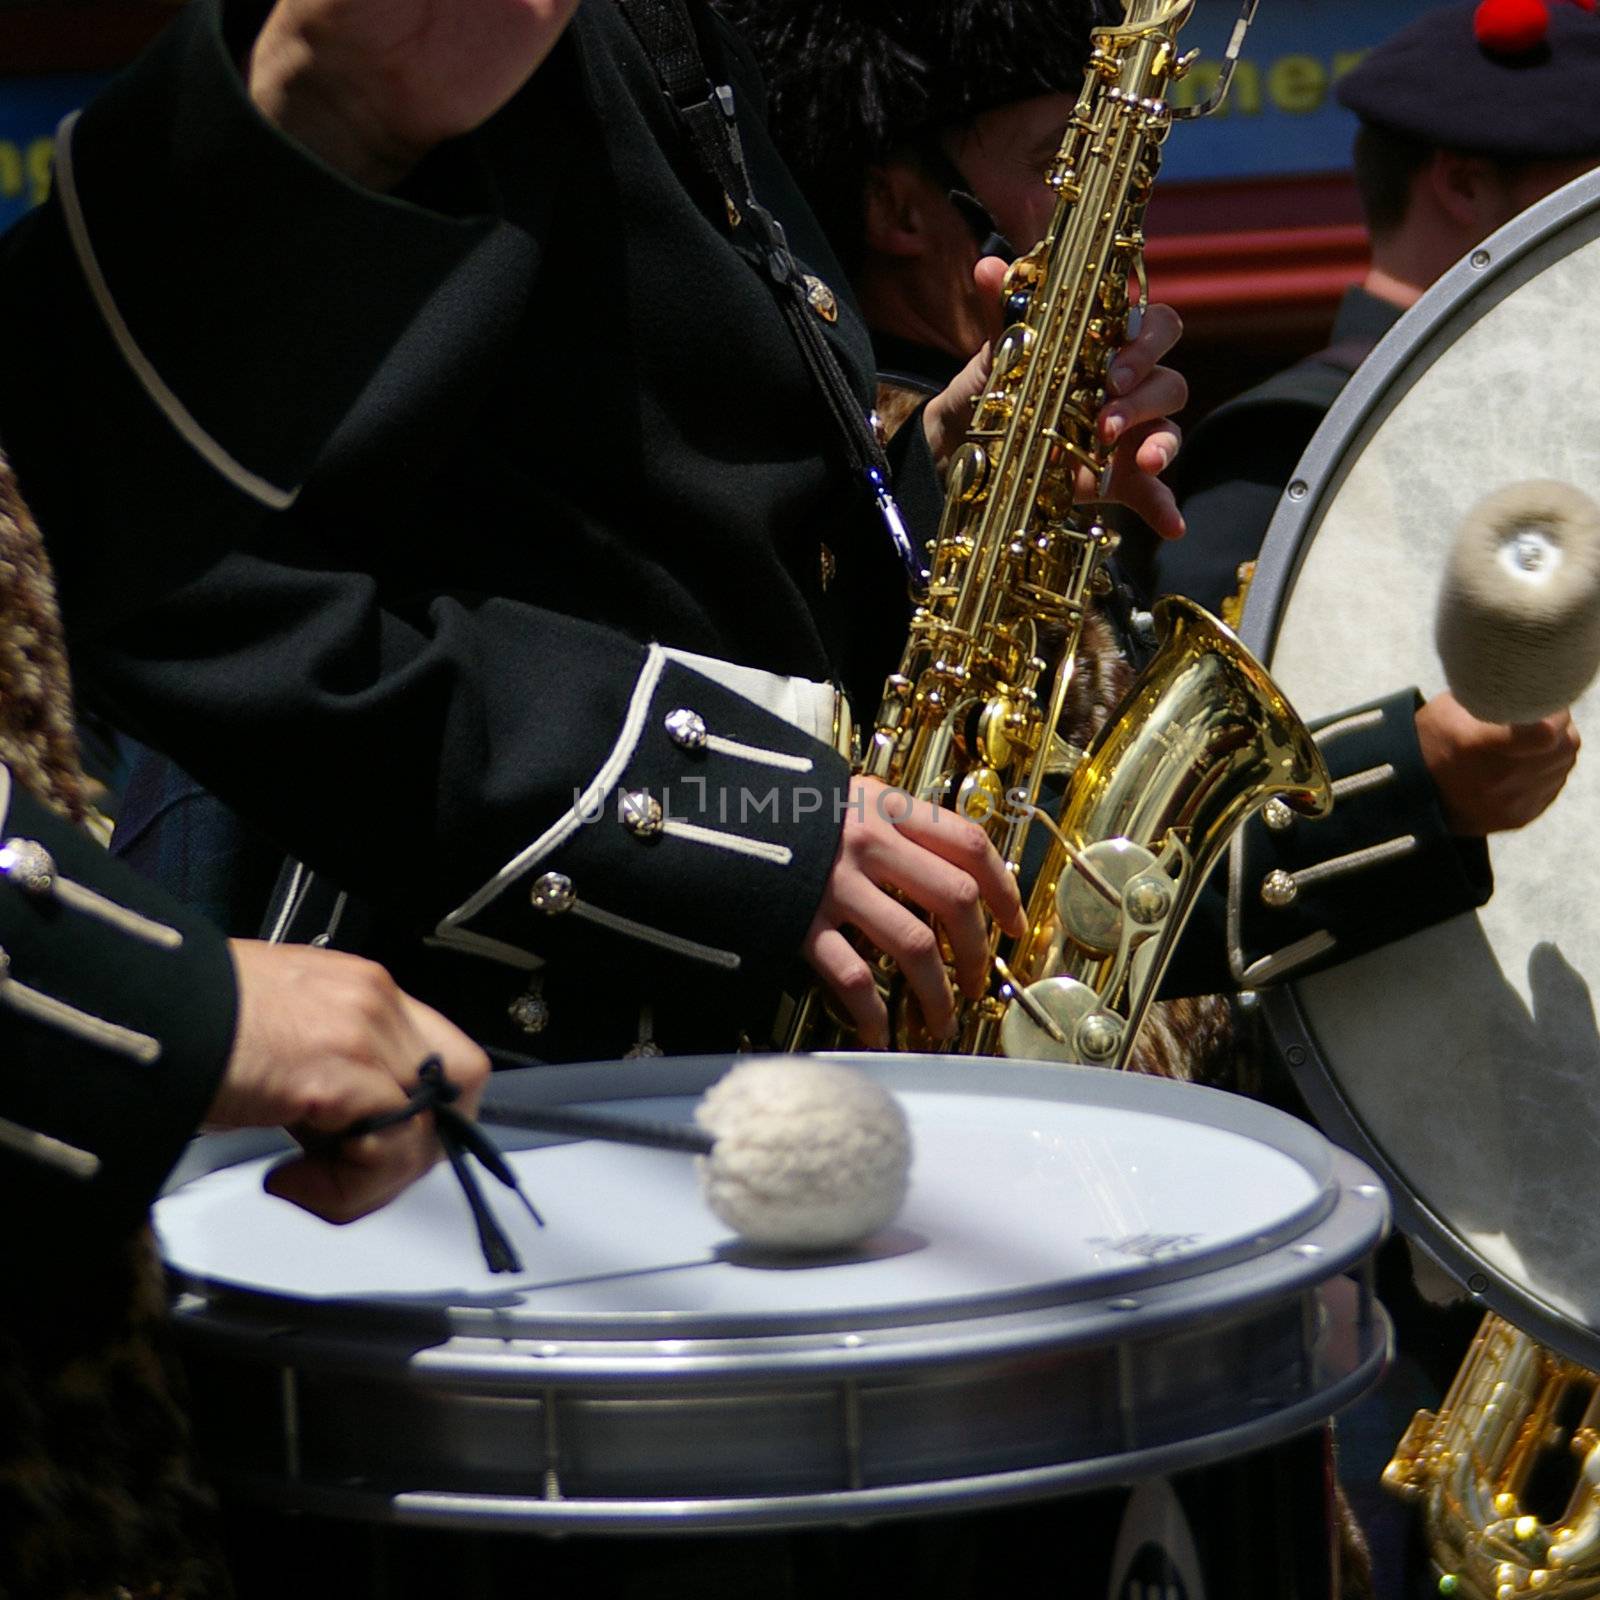 Saxophone and drums as part of a marching band.